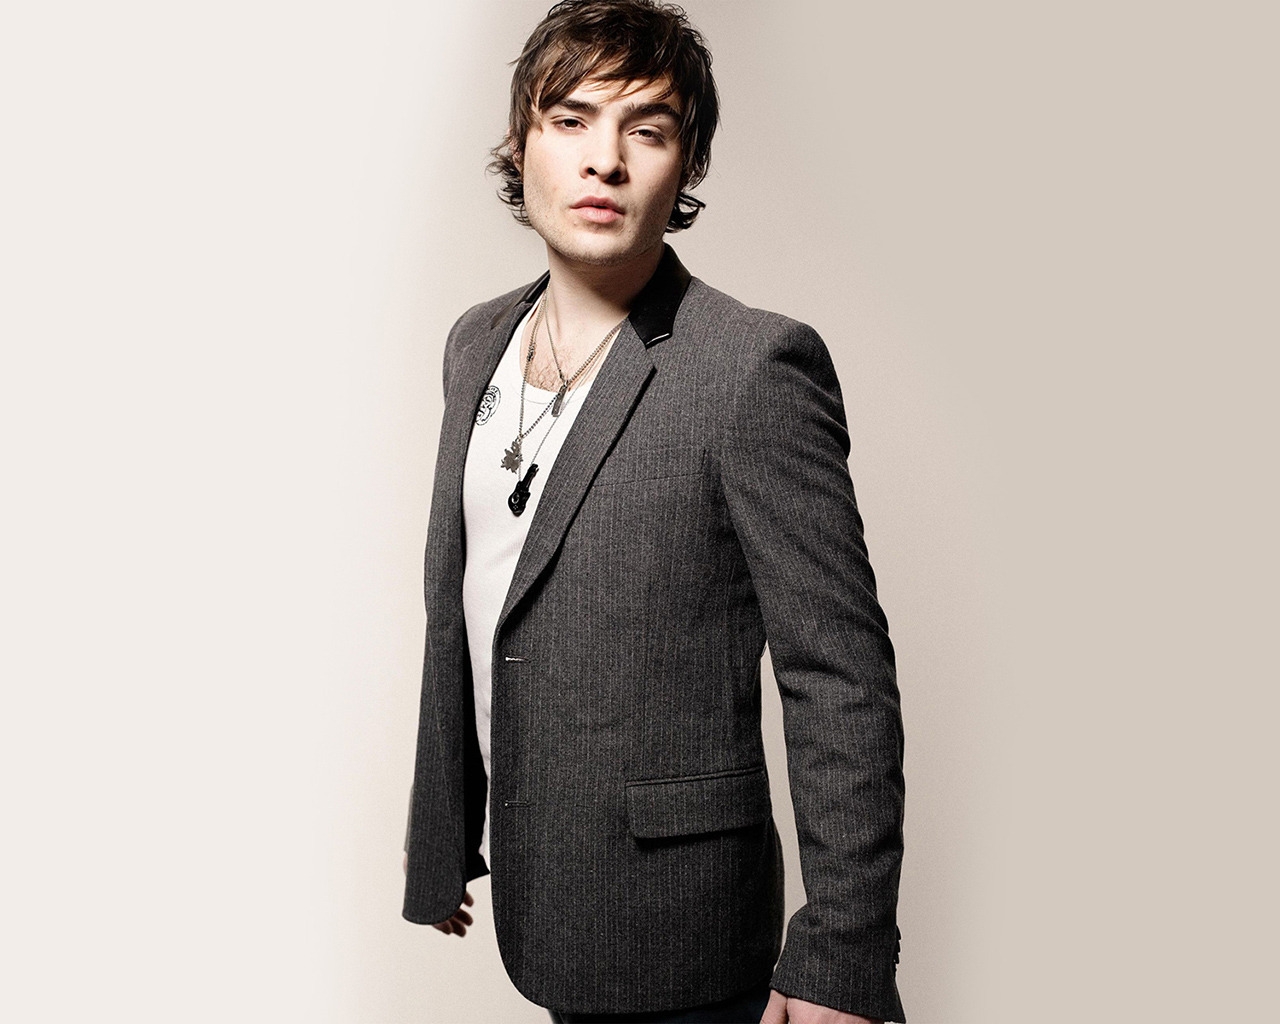 Ed Westwick Cool for 1280 x 1024 resolution